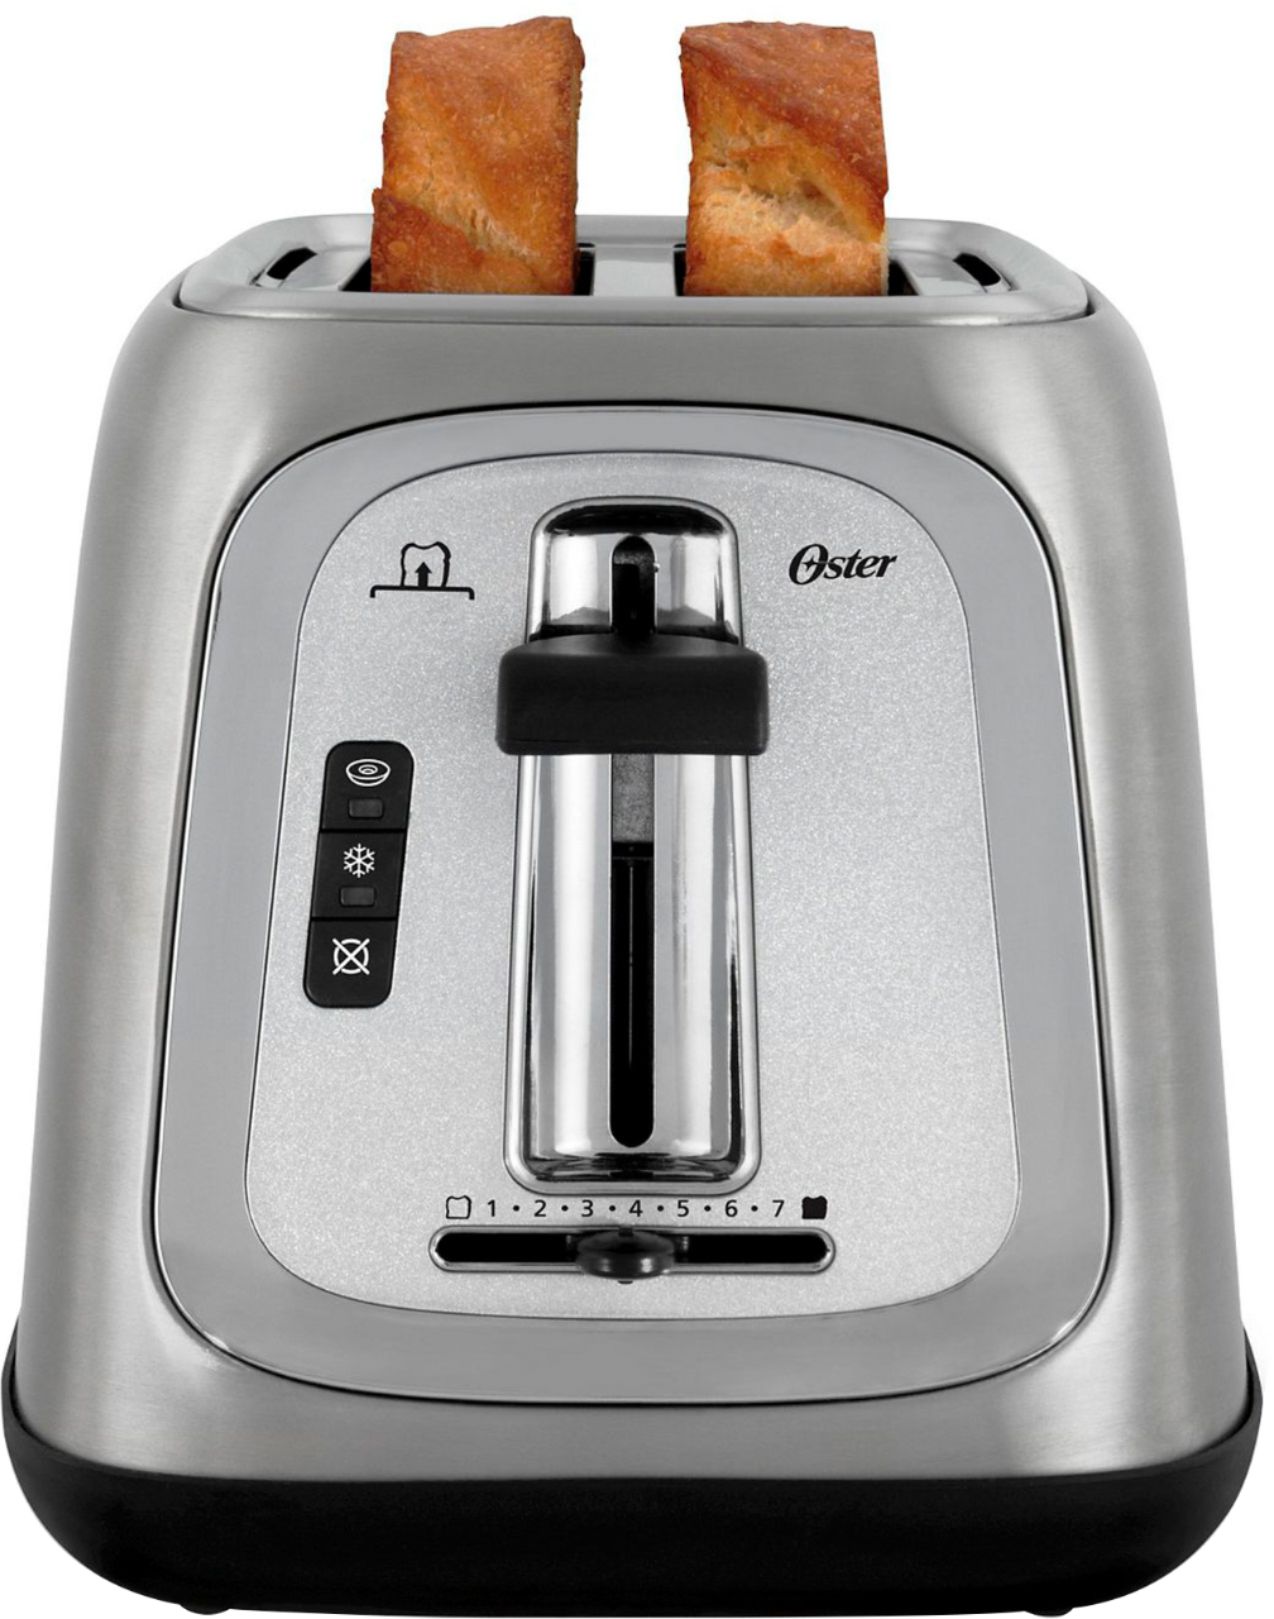 Oster TSSTTRJB0T 2-Slice Toaster with Extra Wide Slots Metallic